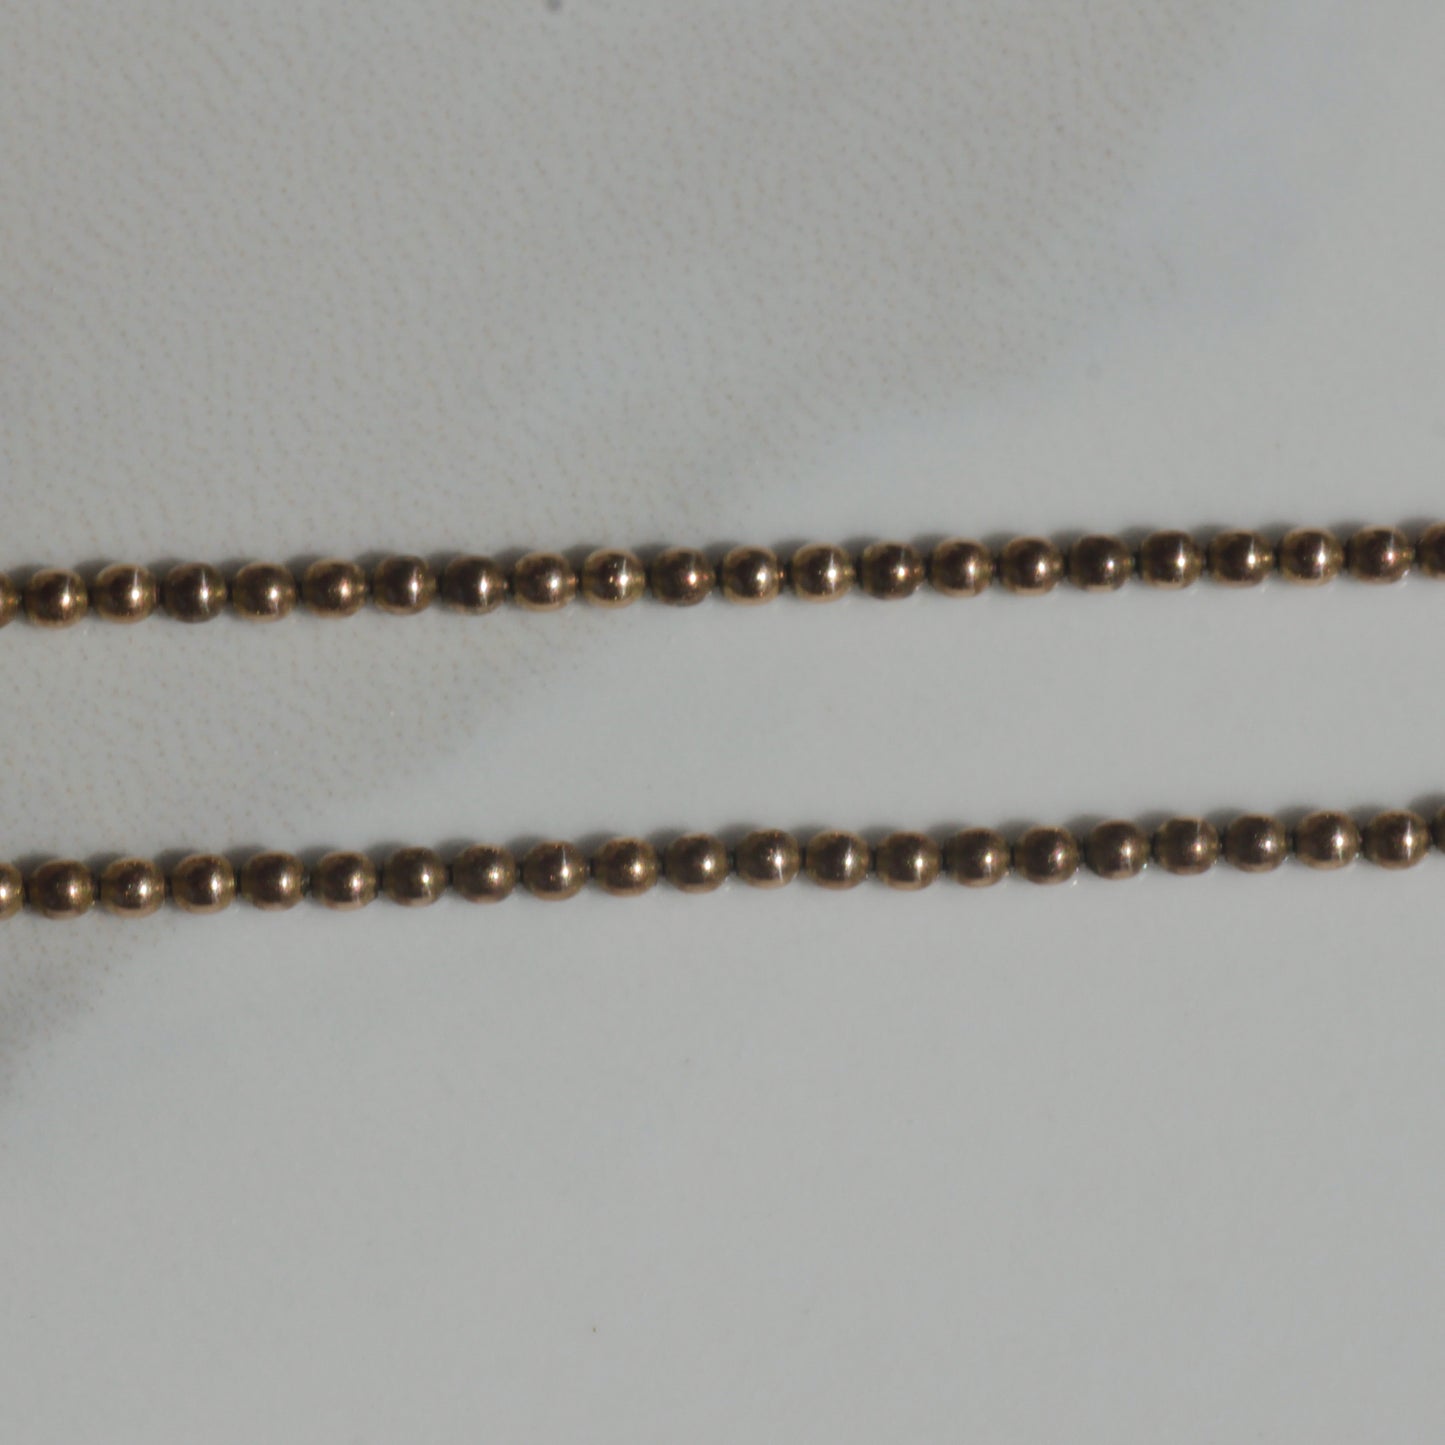 Antique Ball Chain Necklace 16" 14k Gold